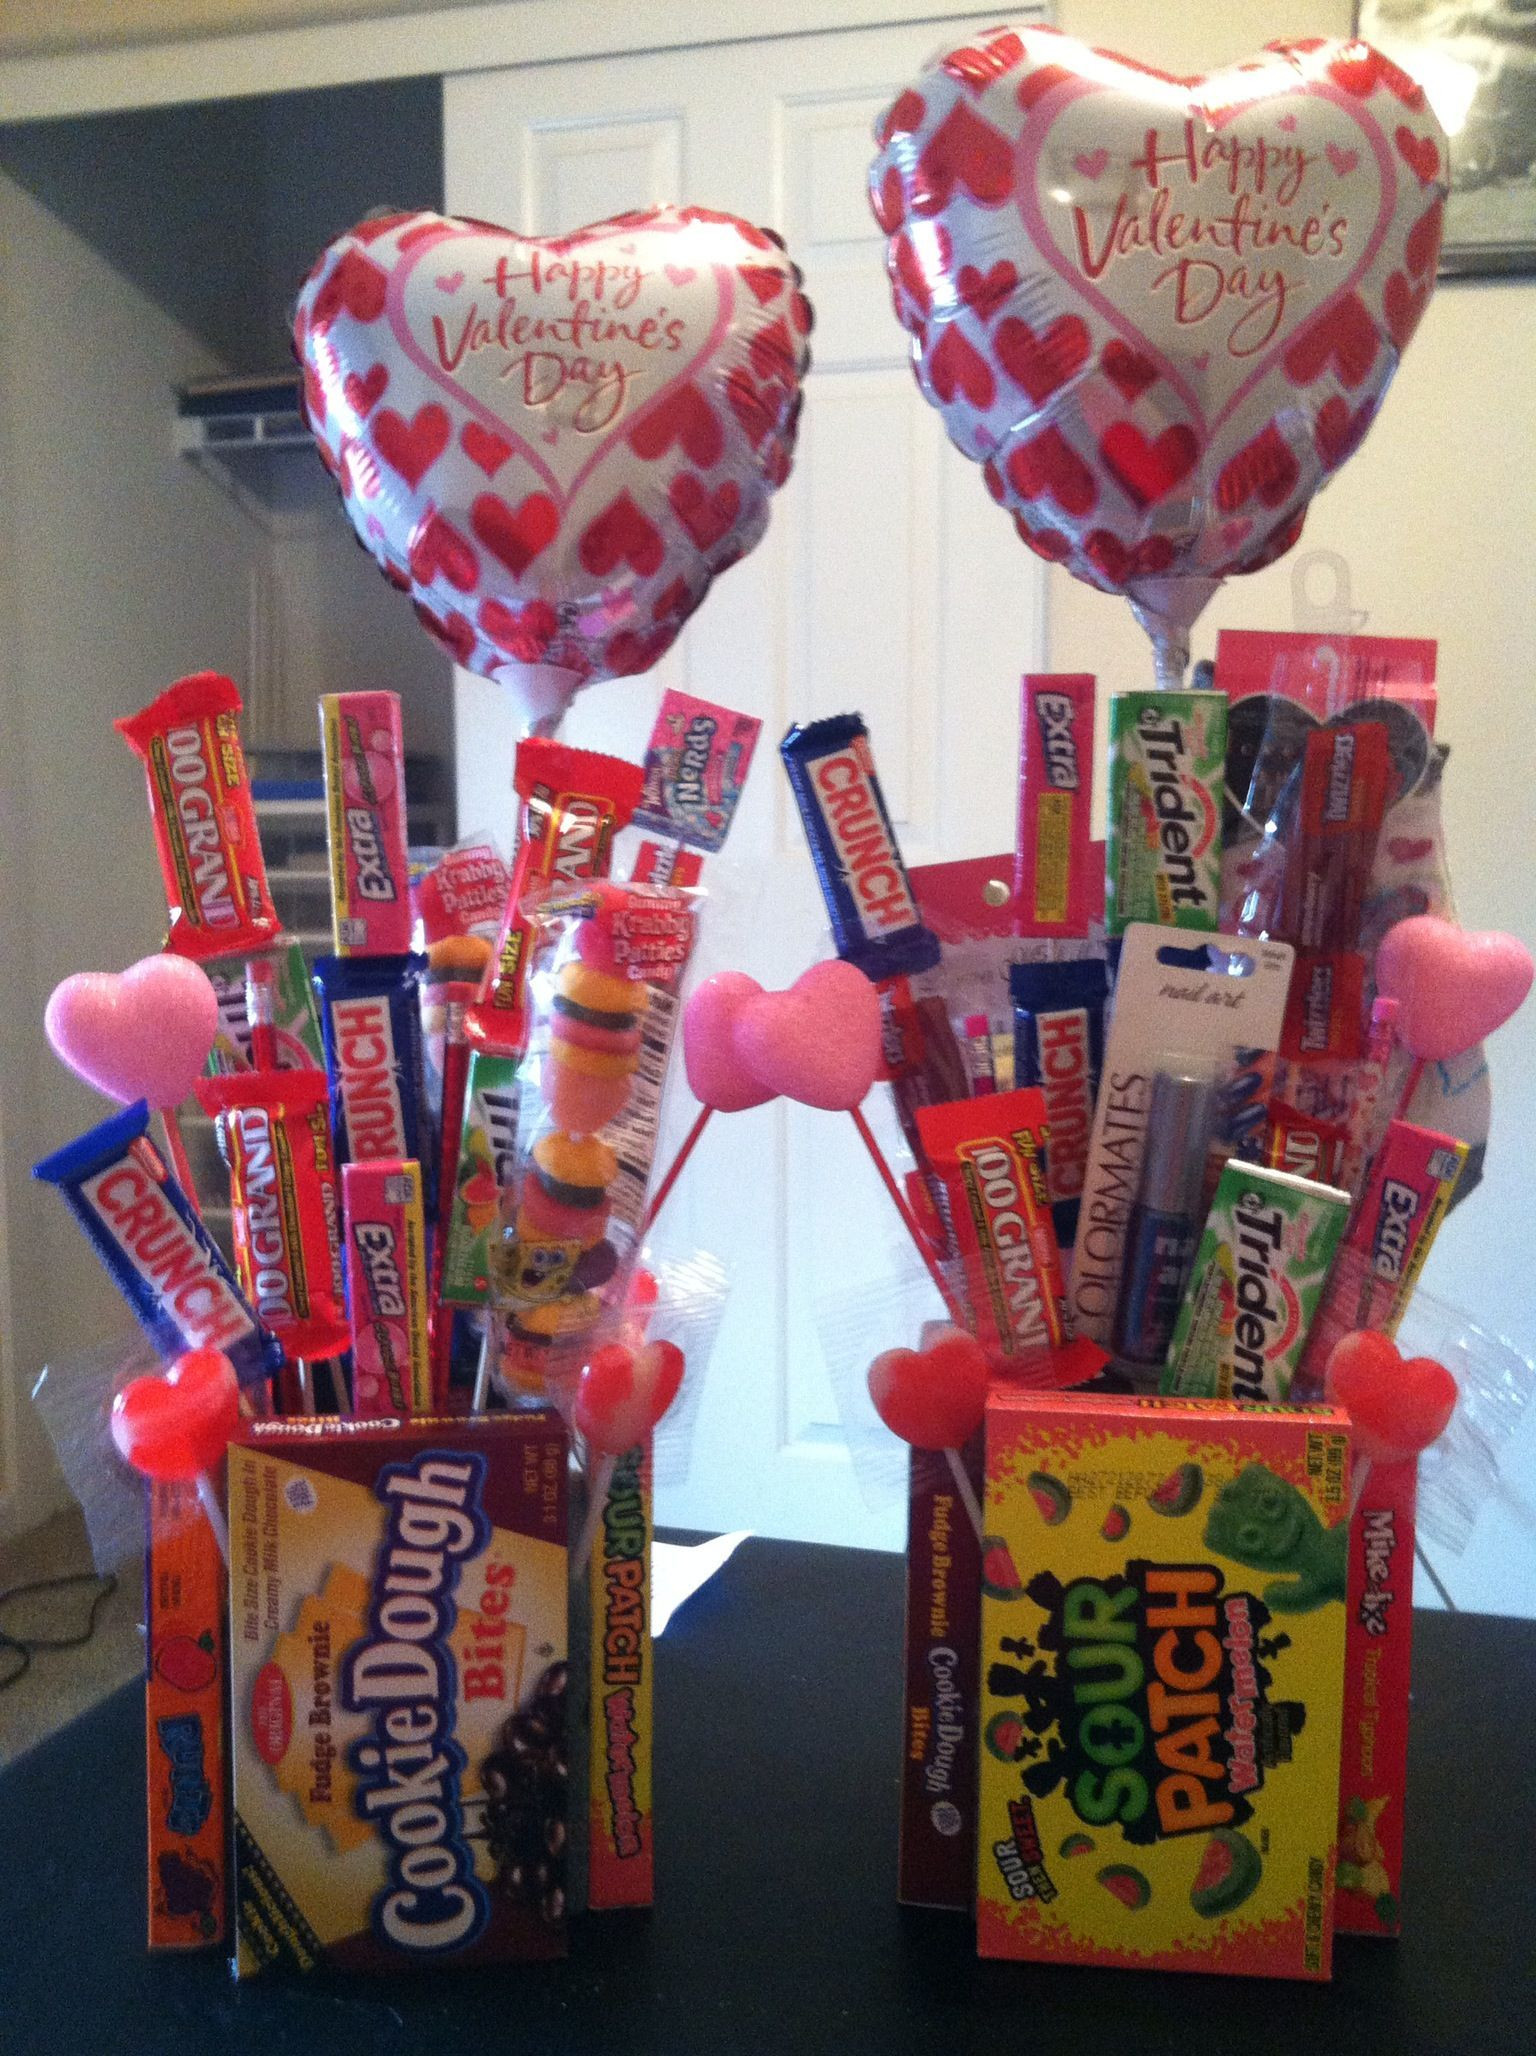 Valentines Day Candy Gift Ideas
 30 Inspiring DIY Gift Baskets Ideas for Any and All